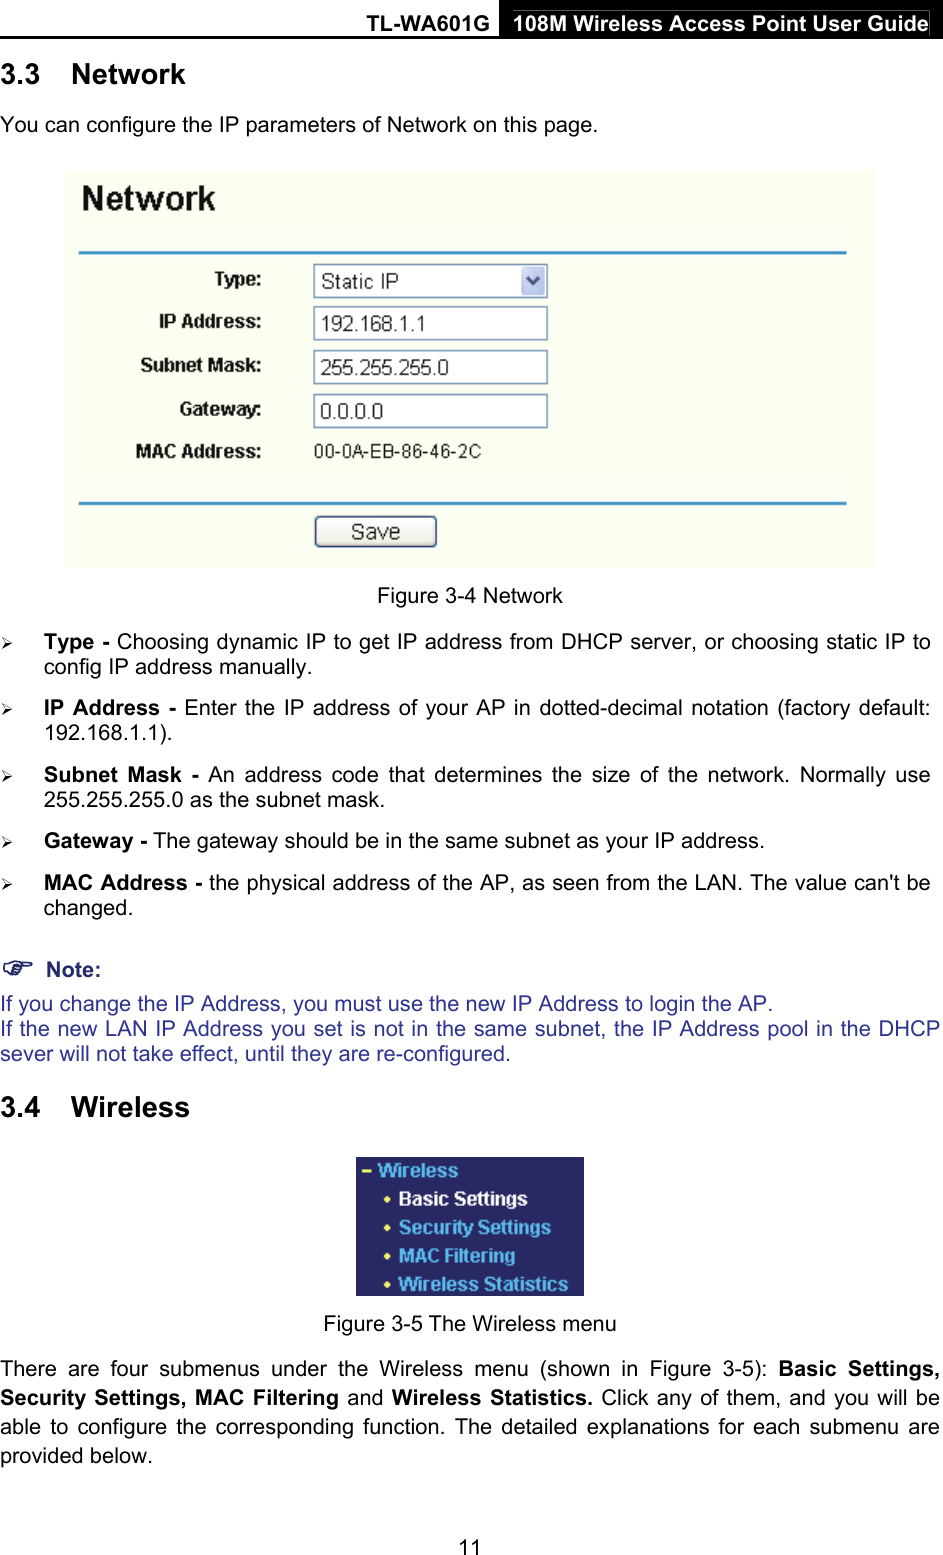 TL-WA601G 108M Wireless Access Point User Guide  113.3  Network You can configure the IP parameters of Network on this page.  Figure 3-4 Network ¾ Type - Choosing dynamic IP to get IP address from DHCP server, or choosing static IP to config IP address manually.   ¾ IP Address - Enter the IP address of your AP in dotted-decimal notation (factory default: 192.168.1.1). ¾ Subnet Mask - An address code that determines the size of the network. Normally use 255.255.255.0 as the subnet mask.   ¾ Gateway - The gateway should be in the same subnet as your IP address.   ¾ MAC Address - the physical address of the AP, as seen from the LAN. The value can&apos;t be changed. ) Note: If you change the IP Address, you must use the new IP Address to login the AP. If the new LAN IP Address you set is not in the same subnet, the IP Address pool in the DHCP sever will not take effect, until they are re-configured. 3.4  Wireless  Figure 3-5 The Wireless menu There are four submenus under the Wireless menu (shown in Figure 3-5): Basic Settings, Security Settings, MAC Filtering and Wireless Statistics. Click any of them, and you will be able to configure the corresponding function. The detailed explanations for each submenu are provided below. 